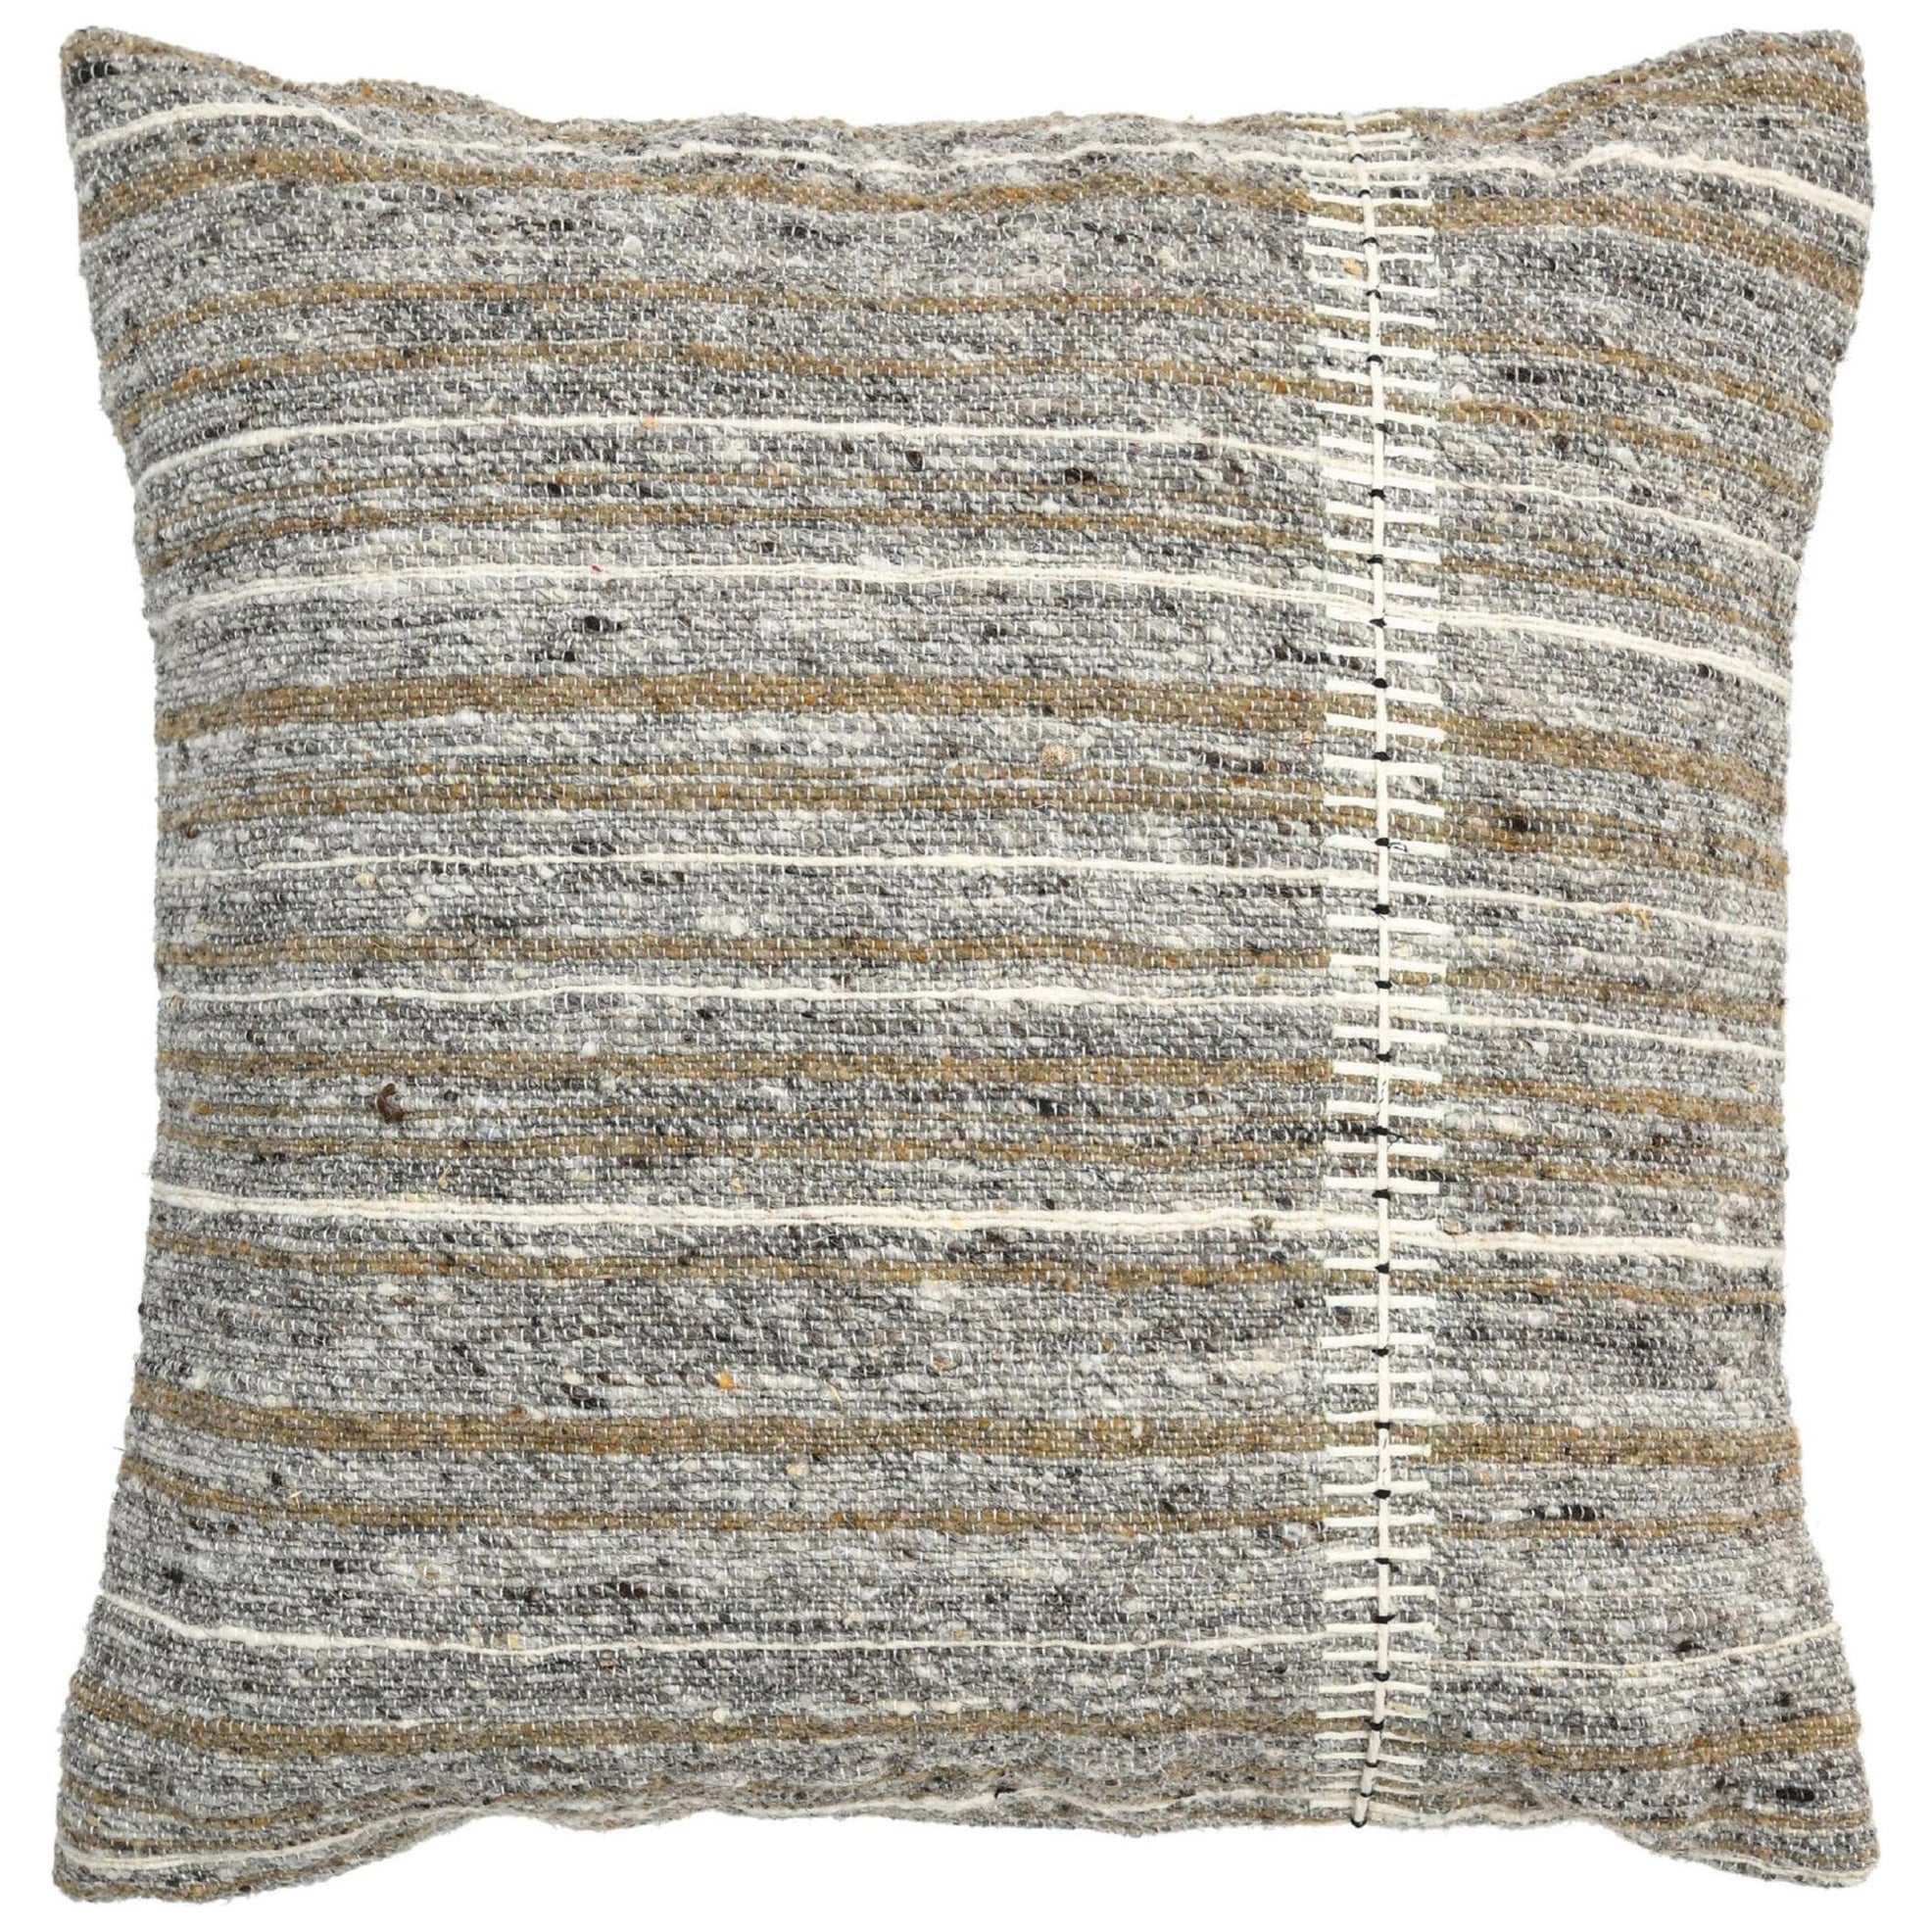 Boho Chic Style Modern Wool and Cotton Pillow In Muted Tones